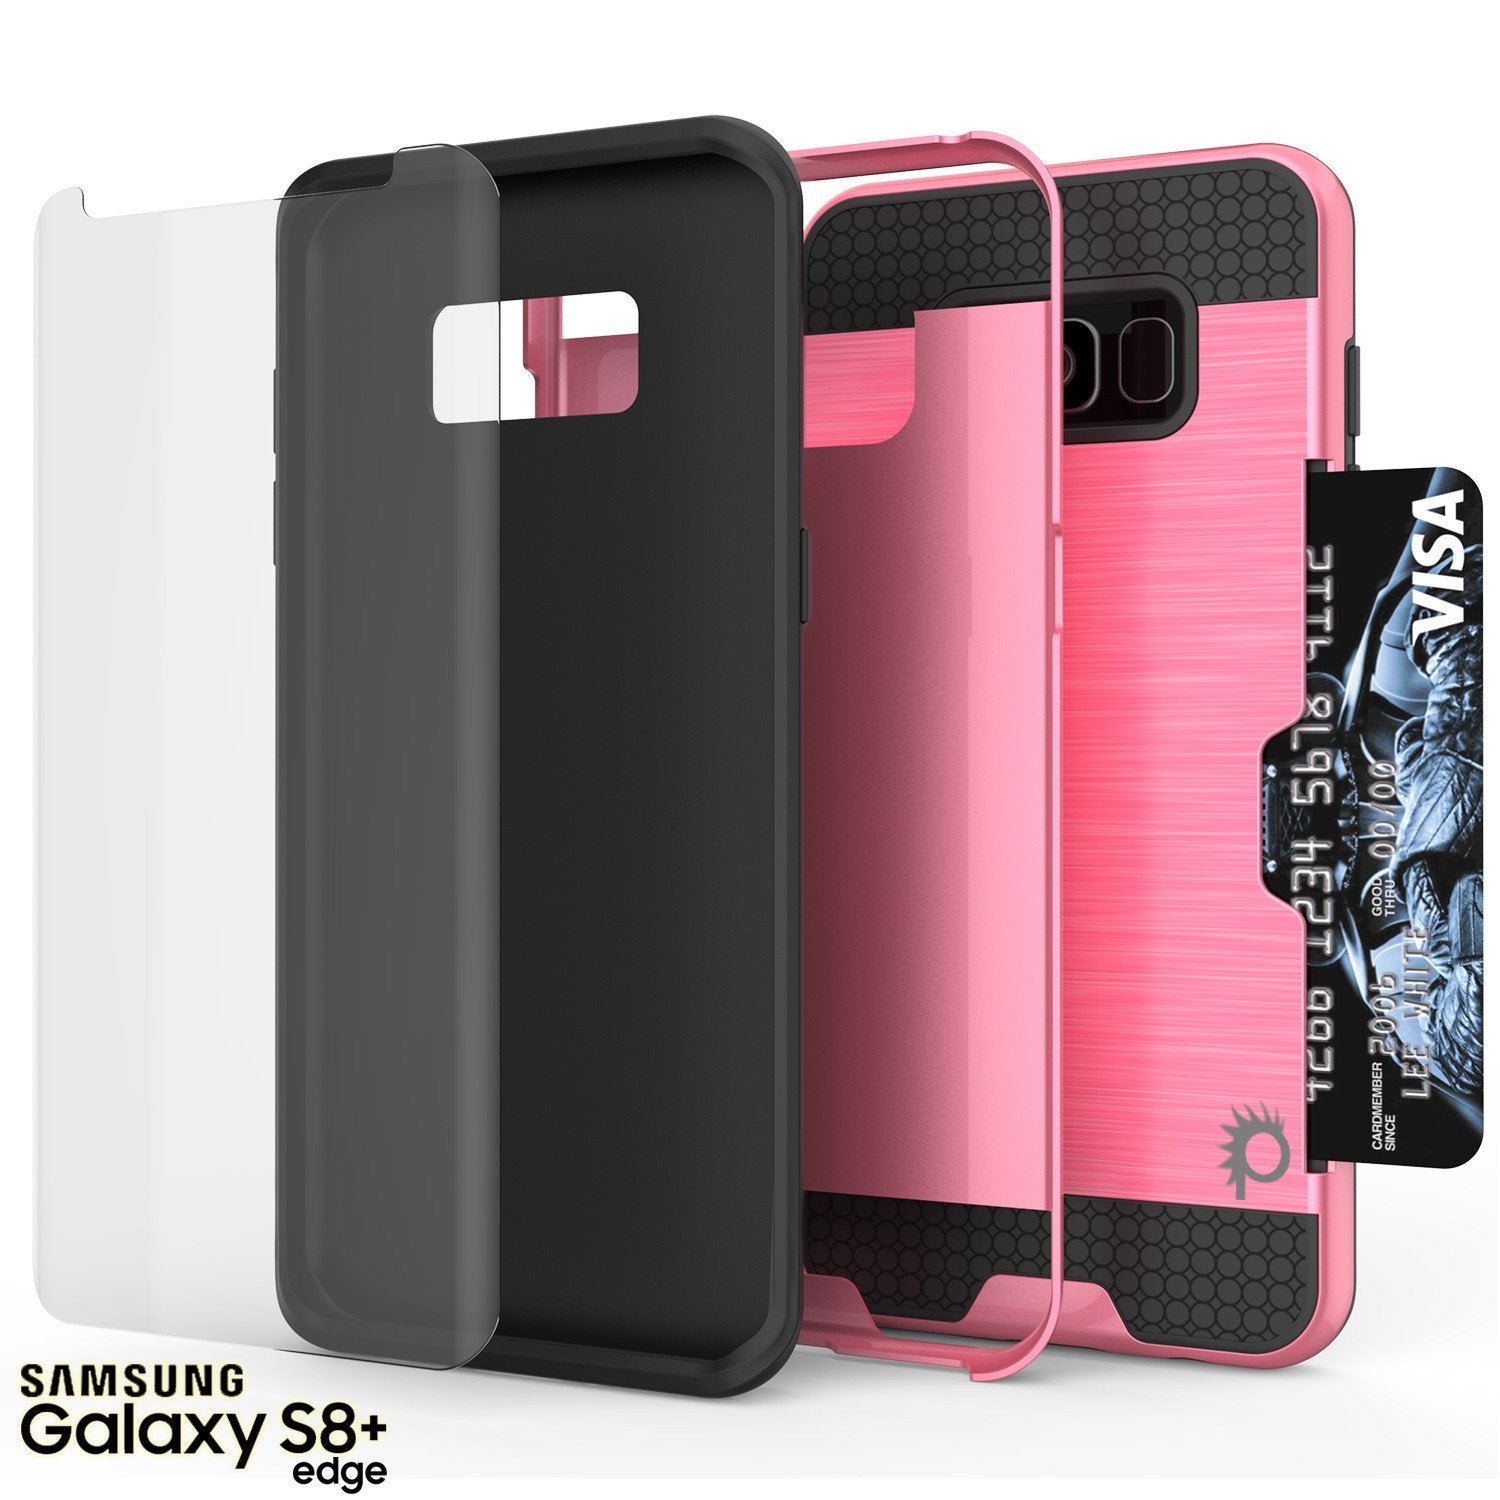 Galaxy S8 Plus Case, PUNKcase [SLOT Series] [Slim Fit] Dual-Layer Armor Cover w/Integrated Anti-Shock System, Credit Card Slot & PunkShield Screen Protector for Samsung Galaxy S8+ [Pink] - PunkCase NZ